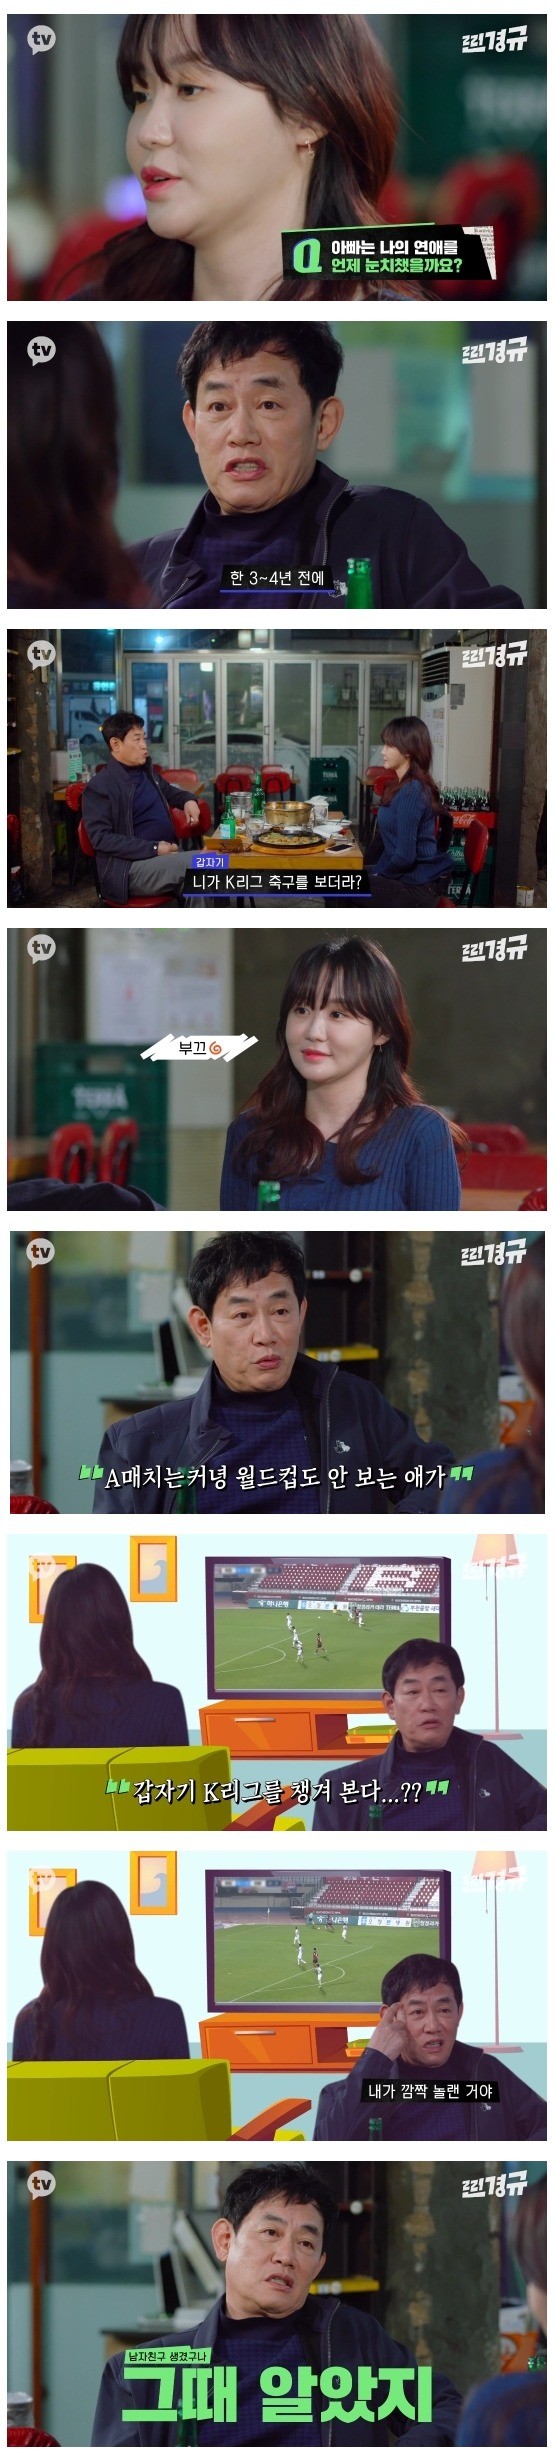 The moment Lee Kyung-kyu noticed his daughter's relationship,